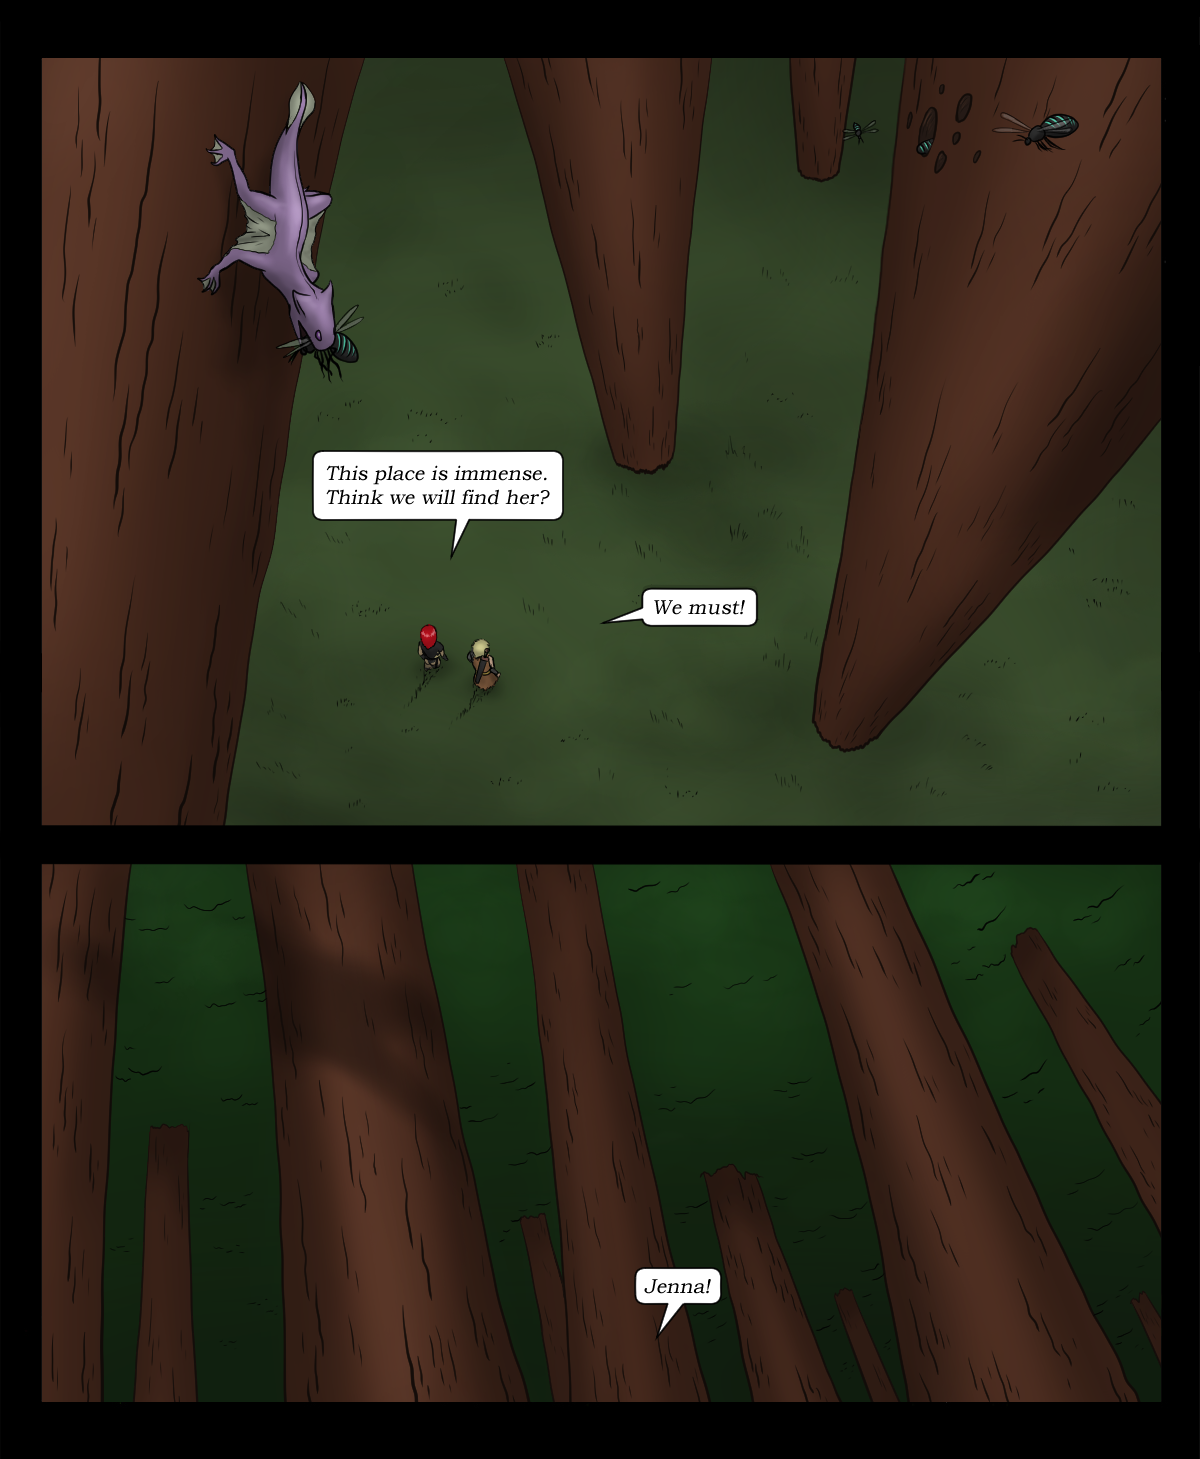 Page 69 - The deep forest